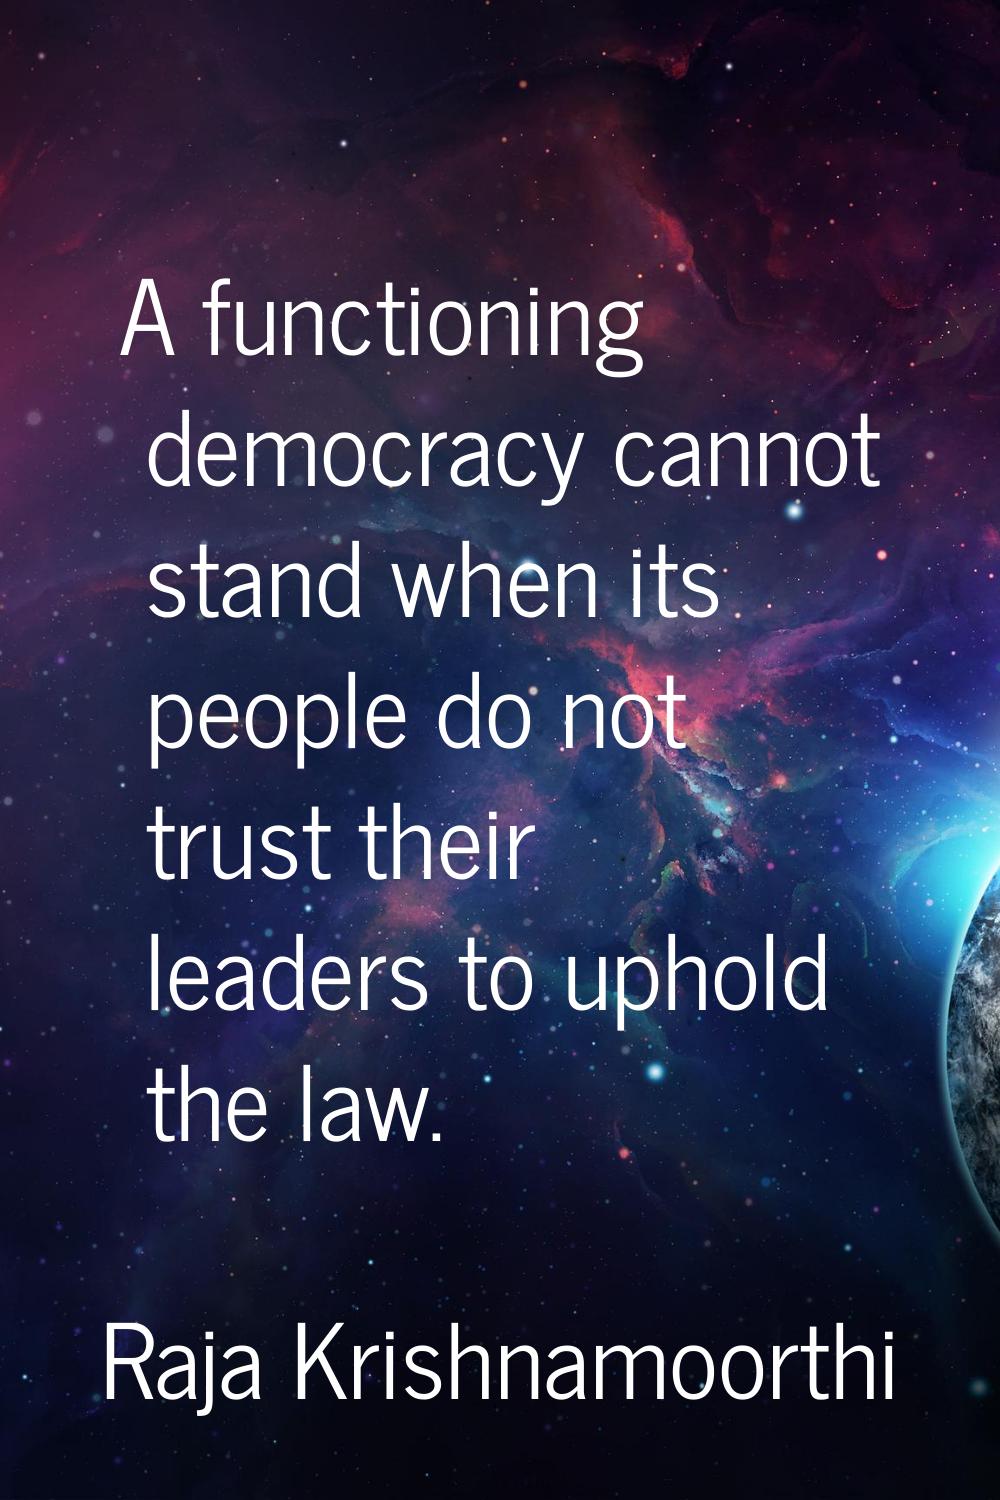 A functioning democracy cannot stand when its people do not trust their leaders to uphold the law.